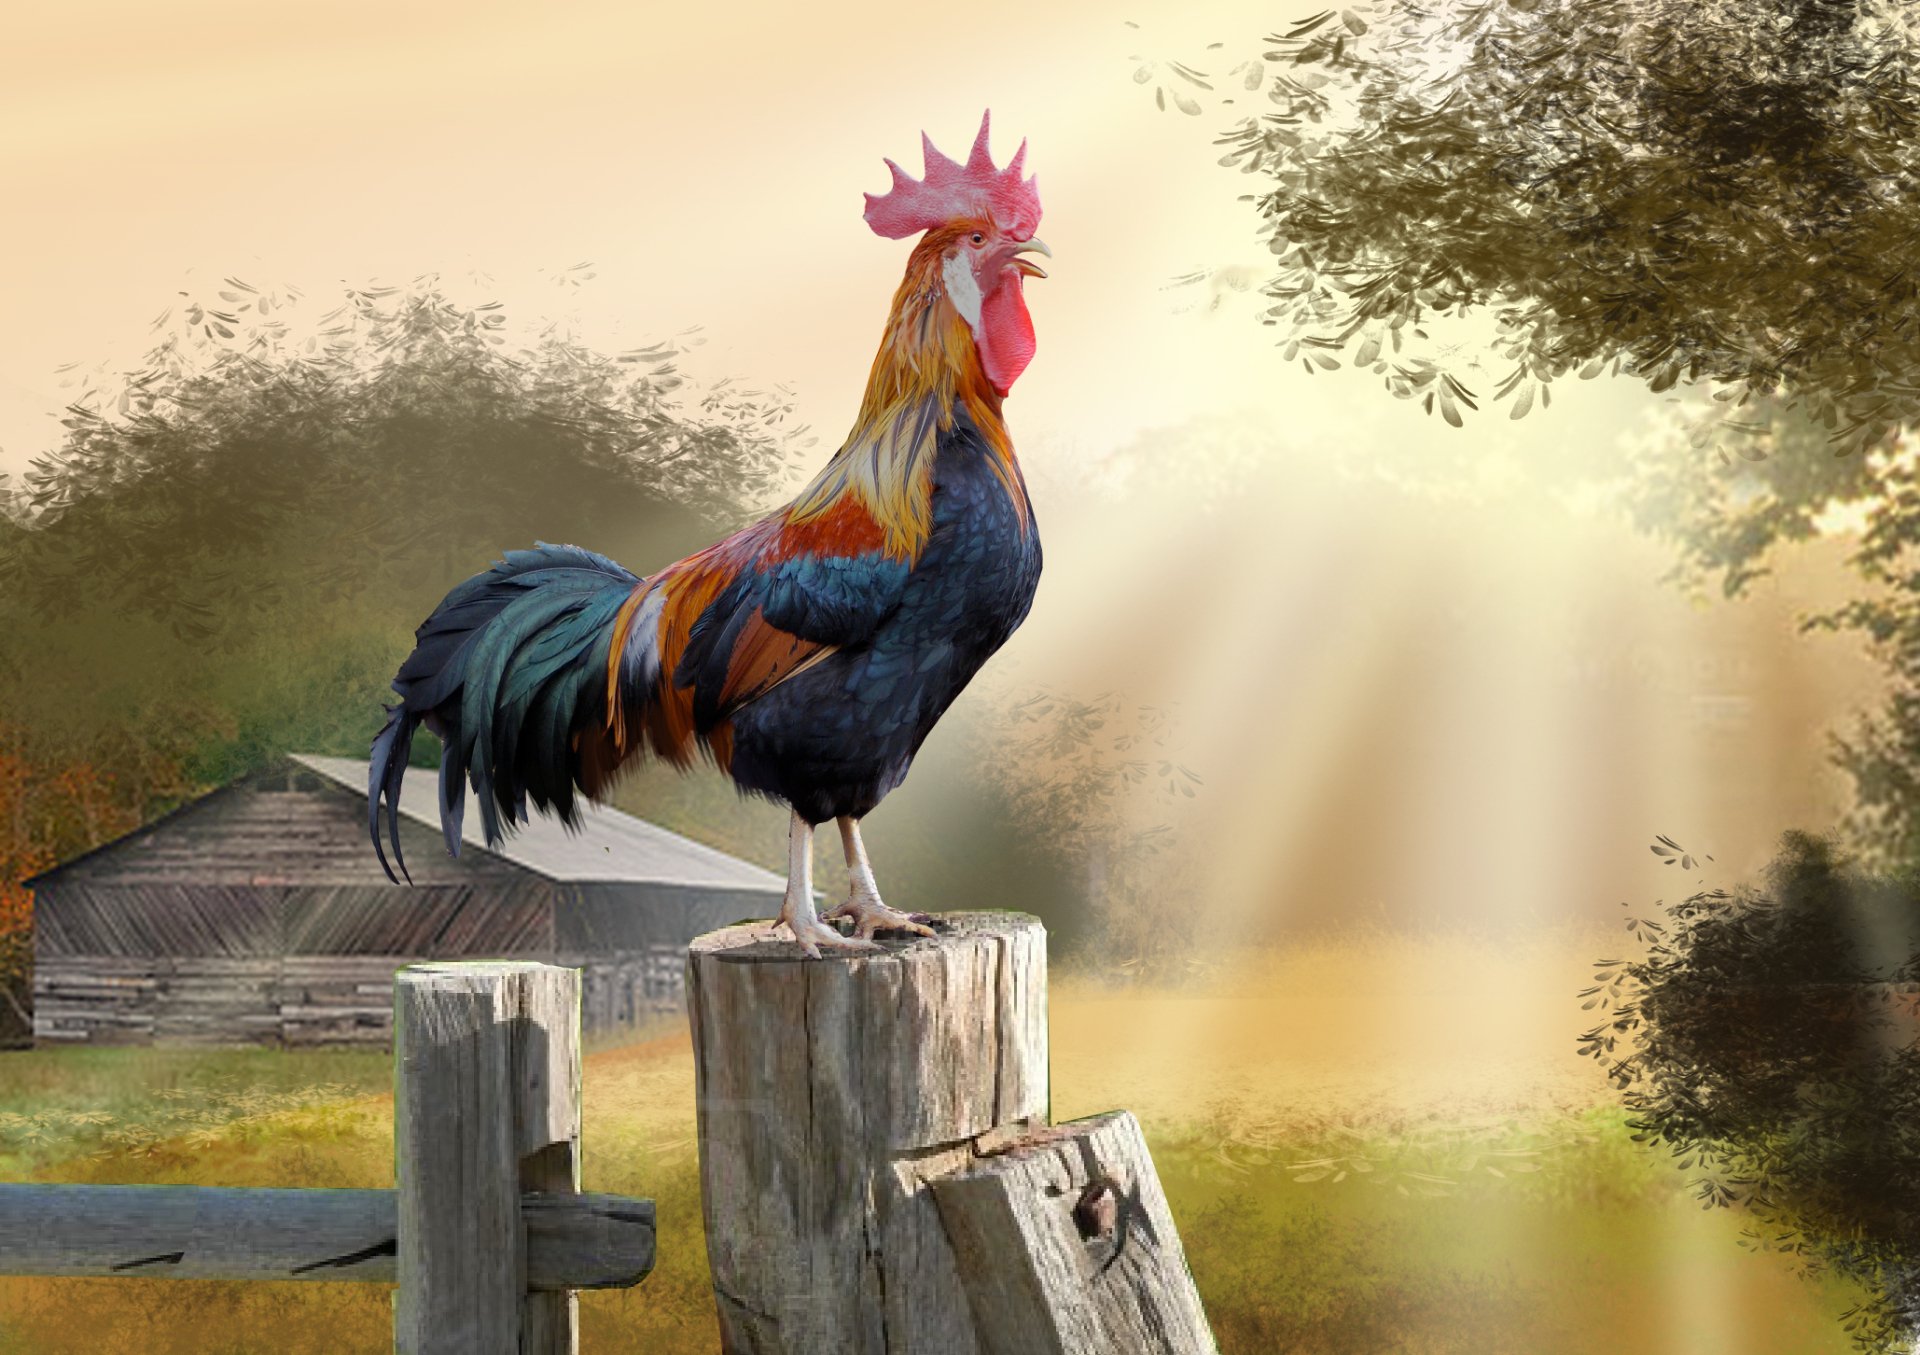 Wallpaper ID 449122  Animal Rooster Phone Wallpaper  720x1280 free  download